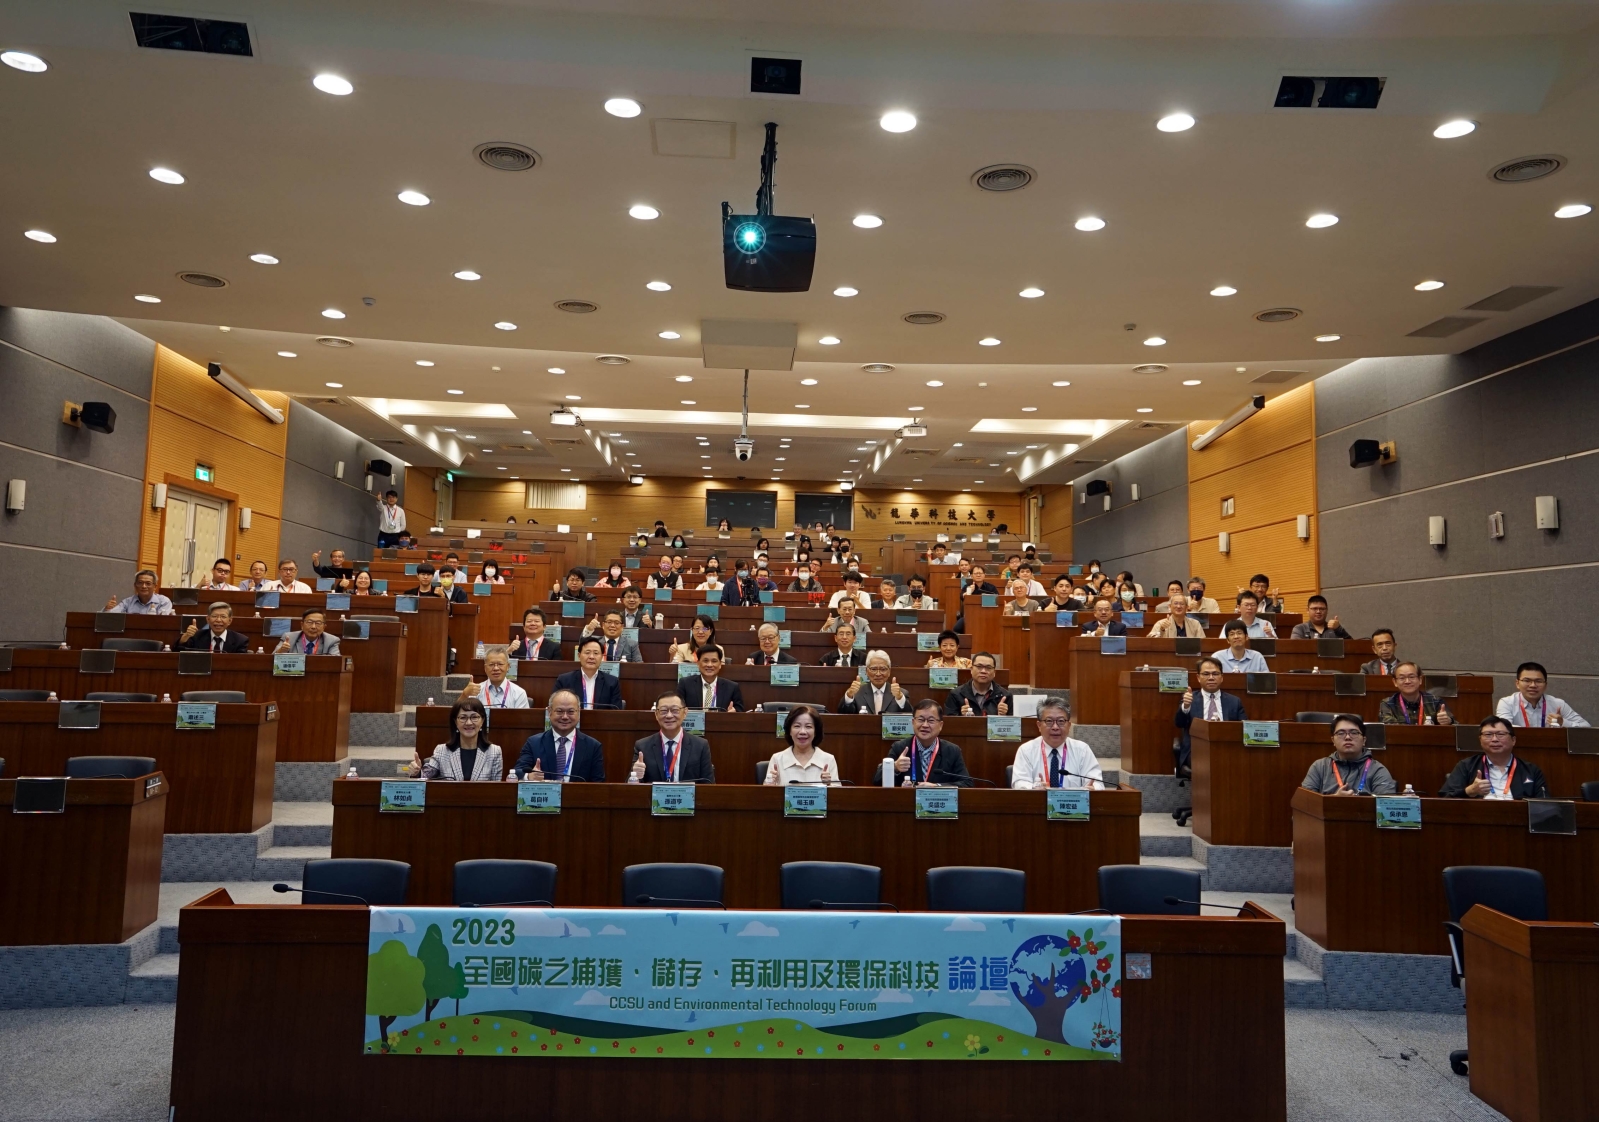 Lunghwa University organized a forum, uniting forces from various sectors at home and abroad to collaborate in promoting net zero emissions.